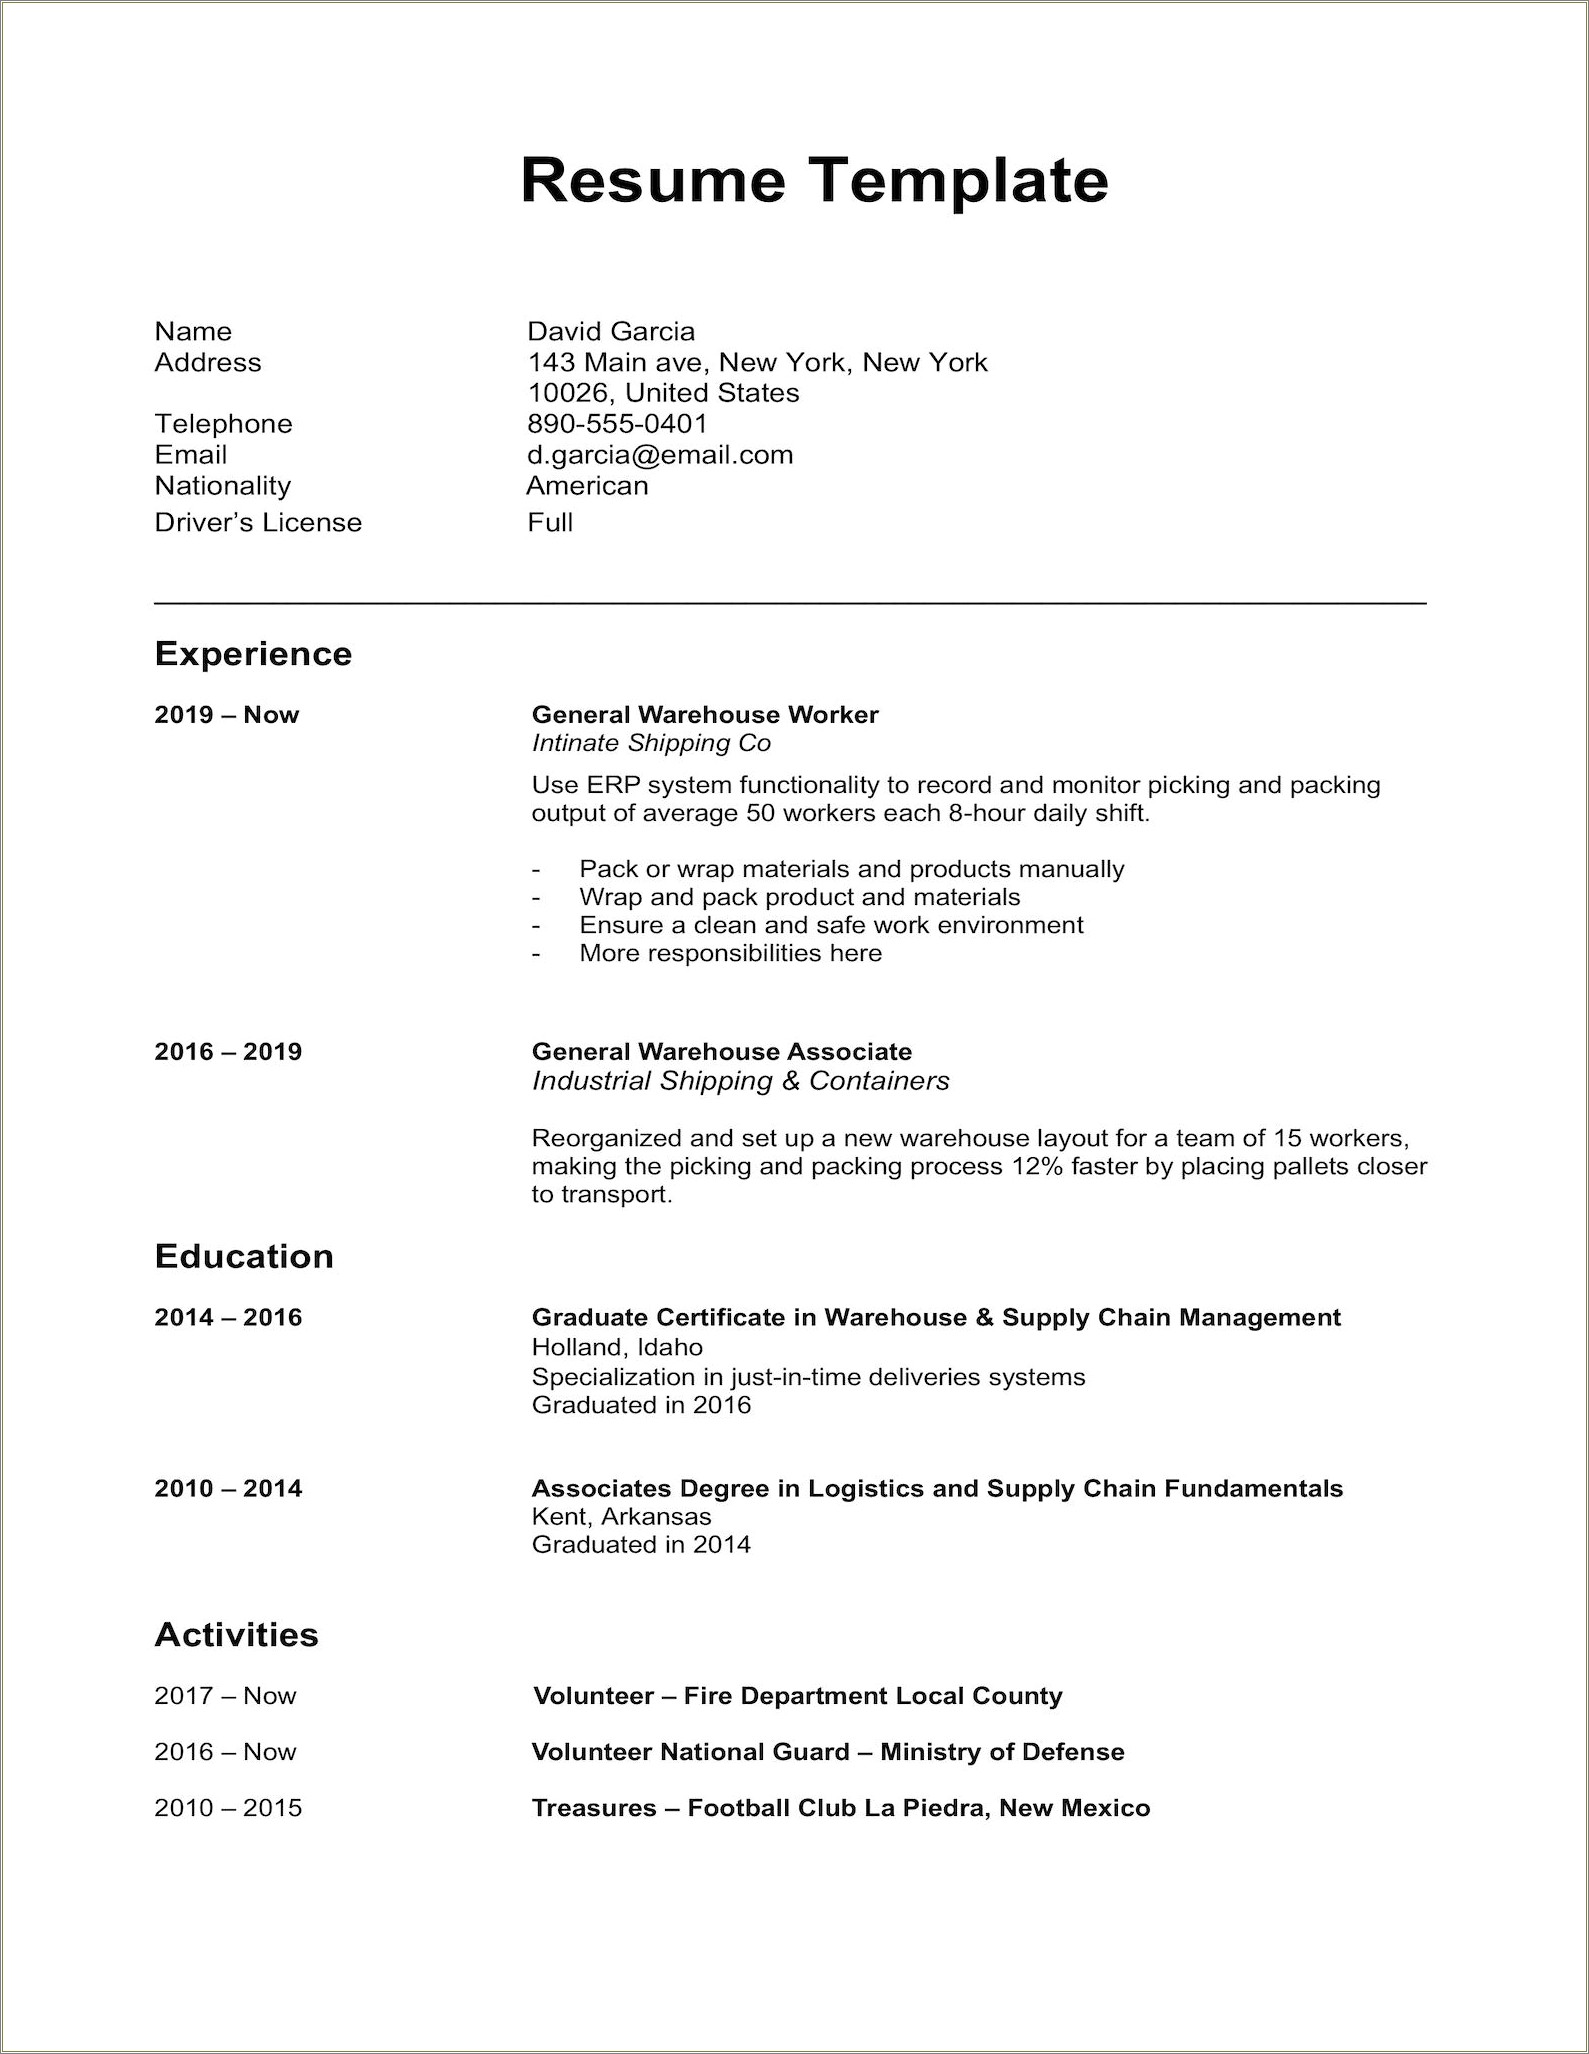 Resume Template Free Download Word Format